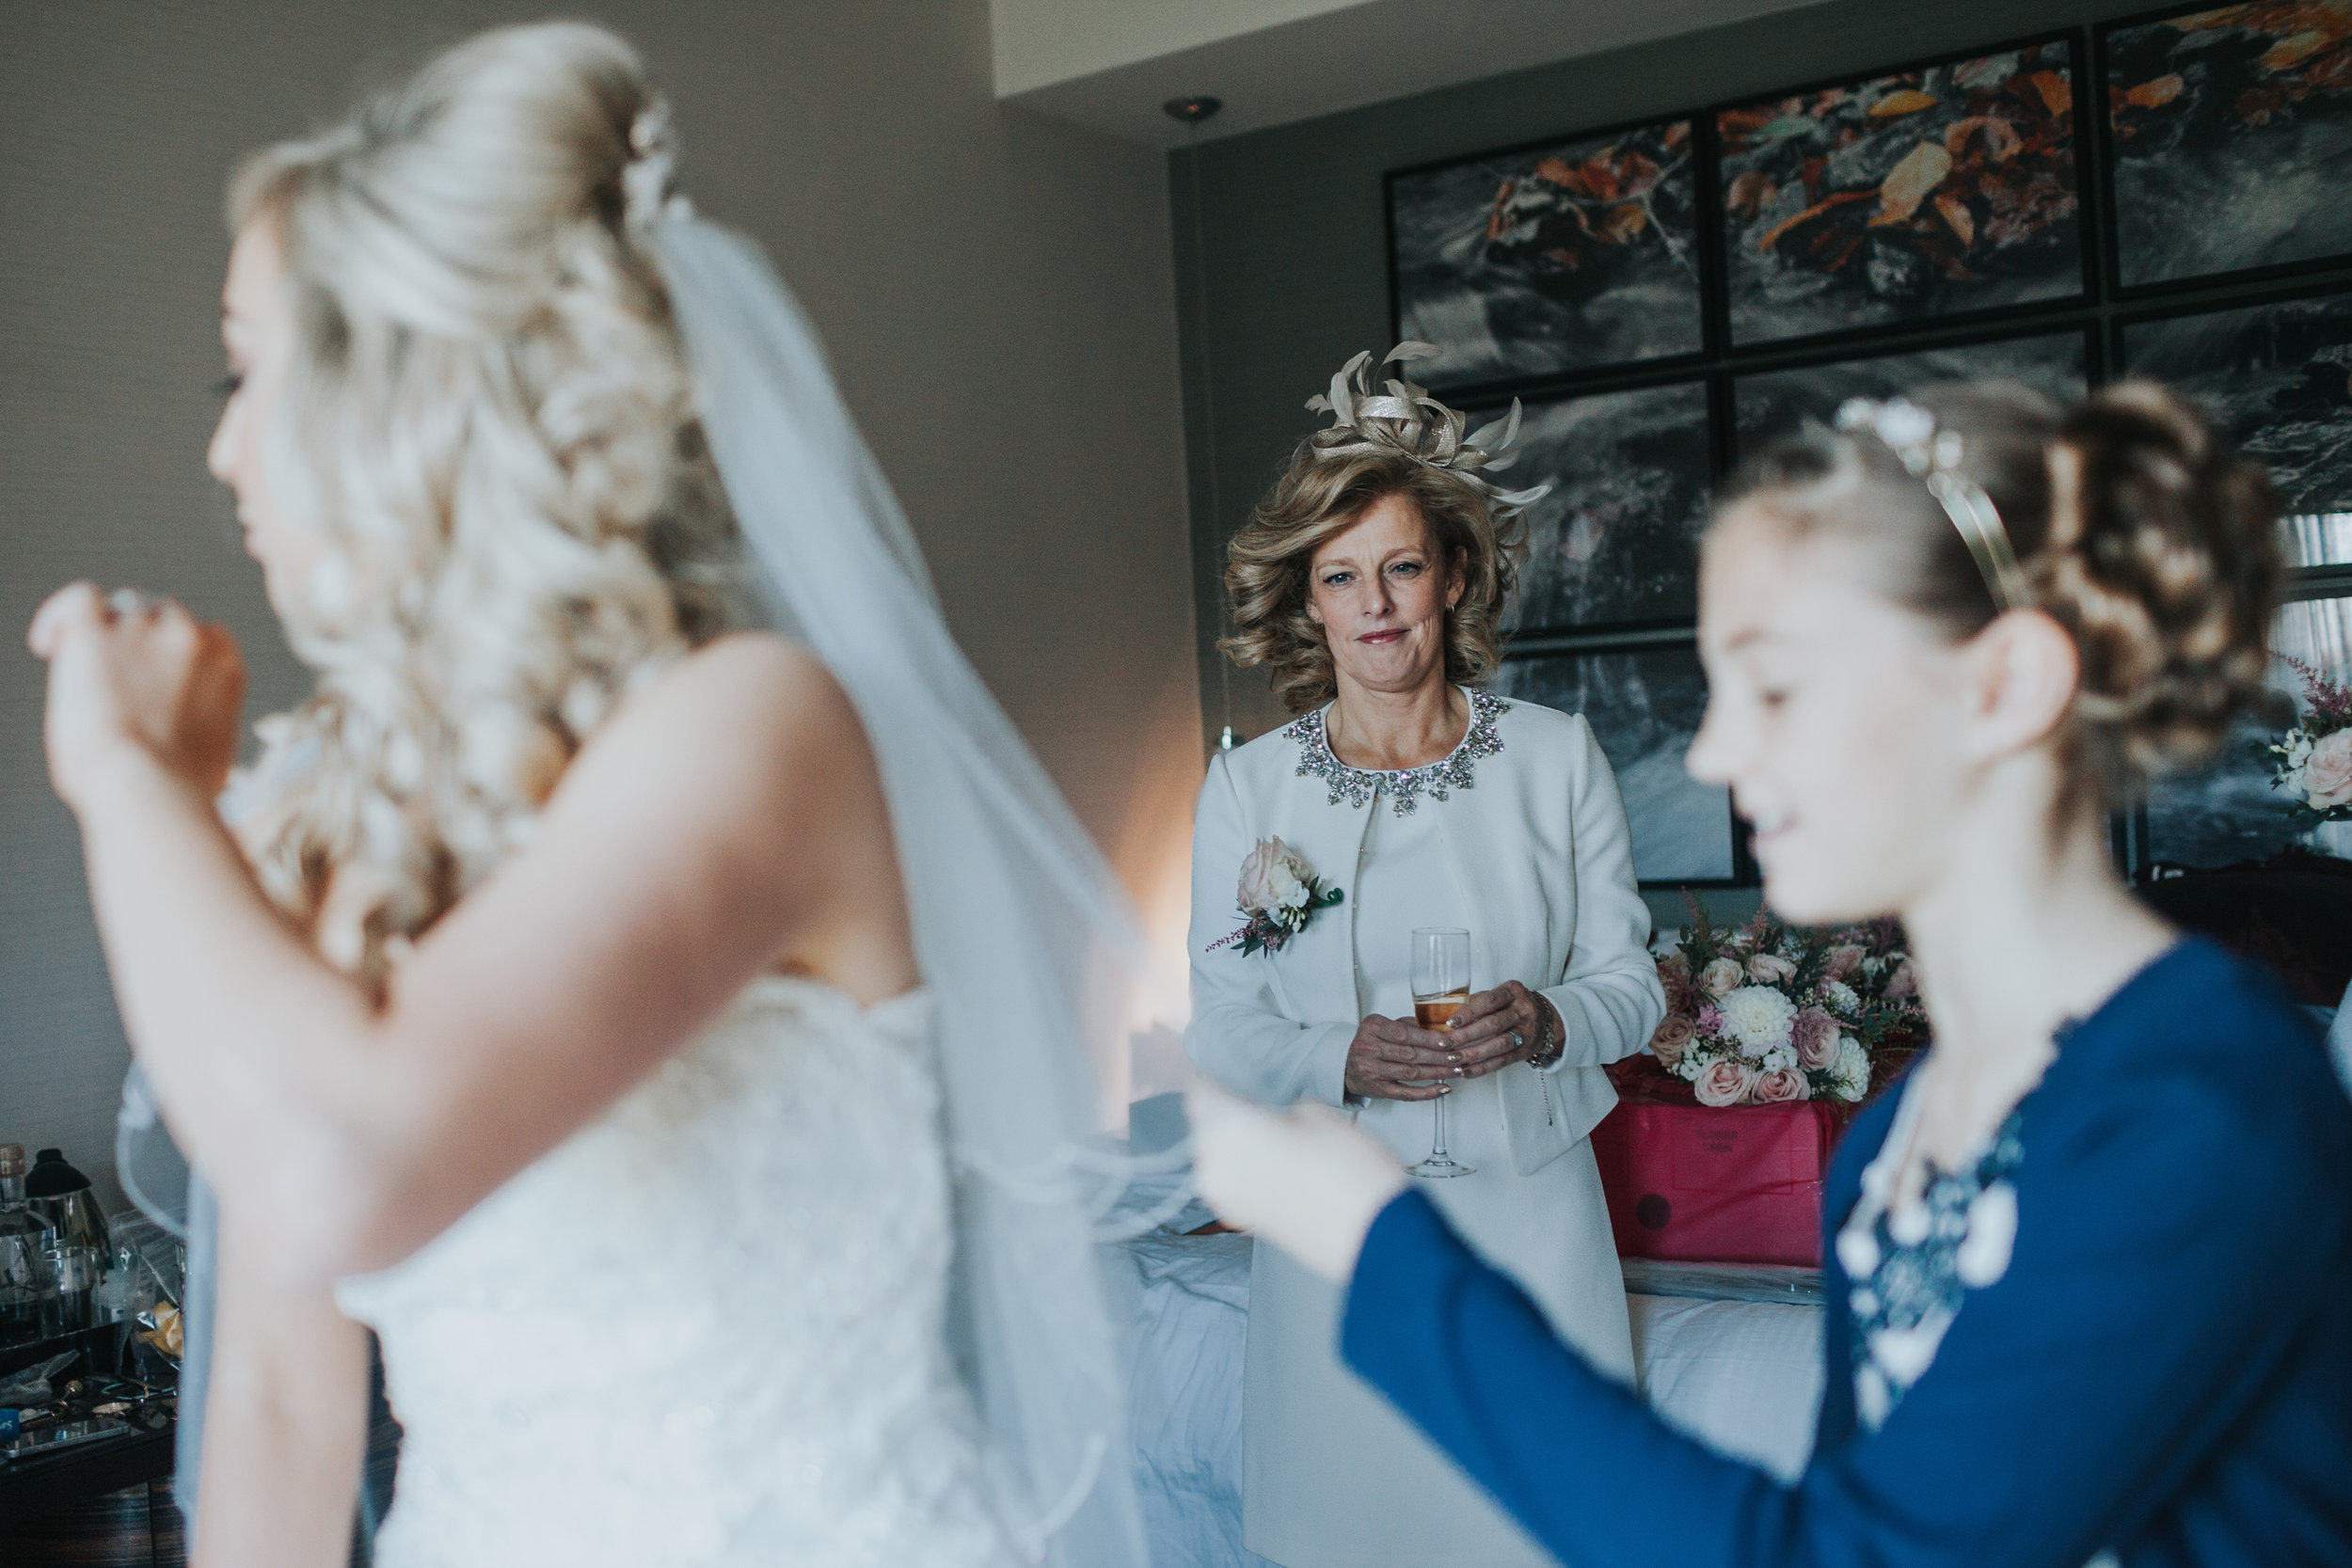 Mother of the Bride looks proudly as her daughter puts on her wedding dress. 